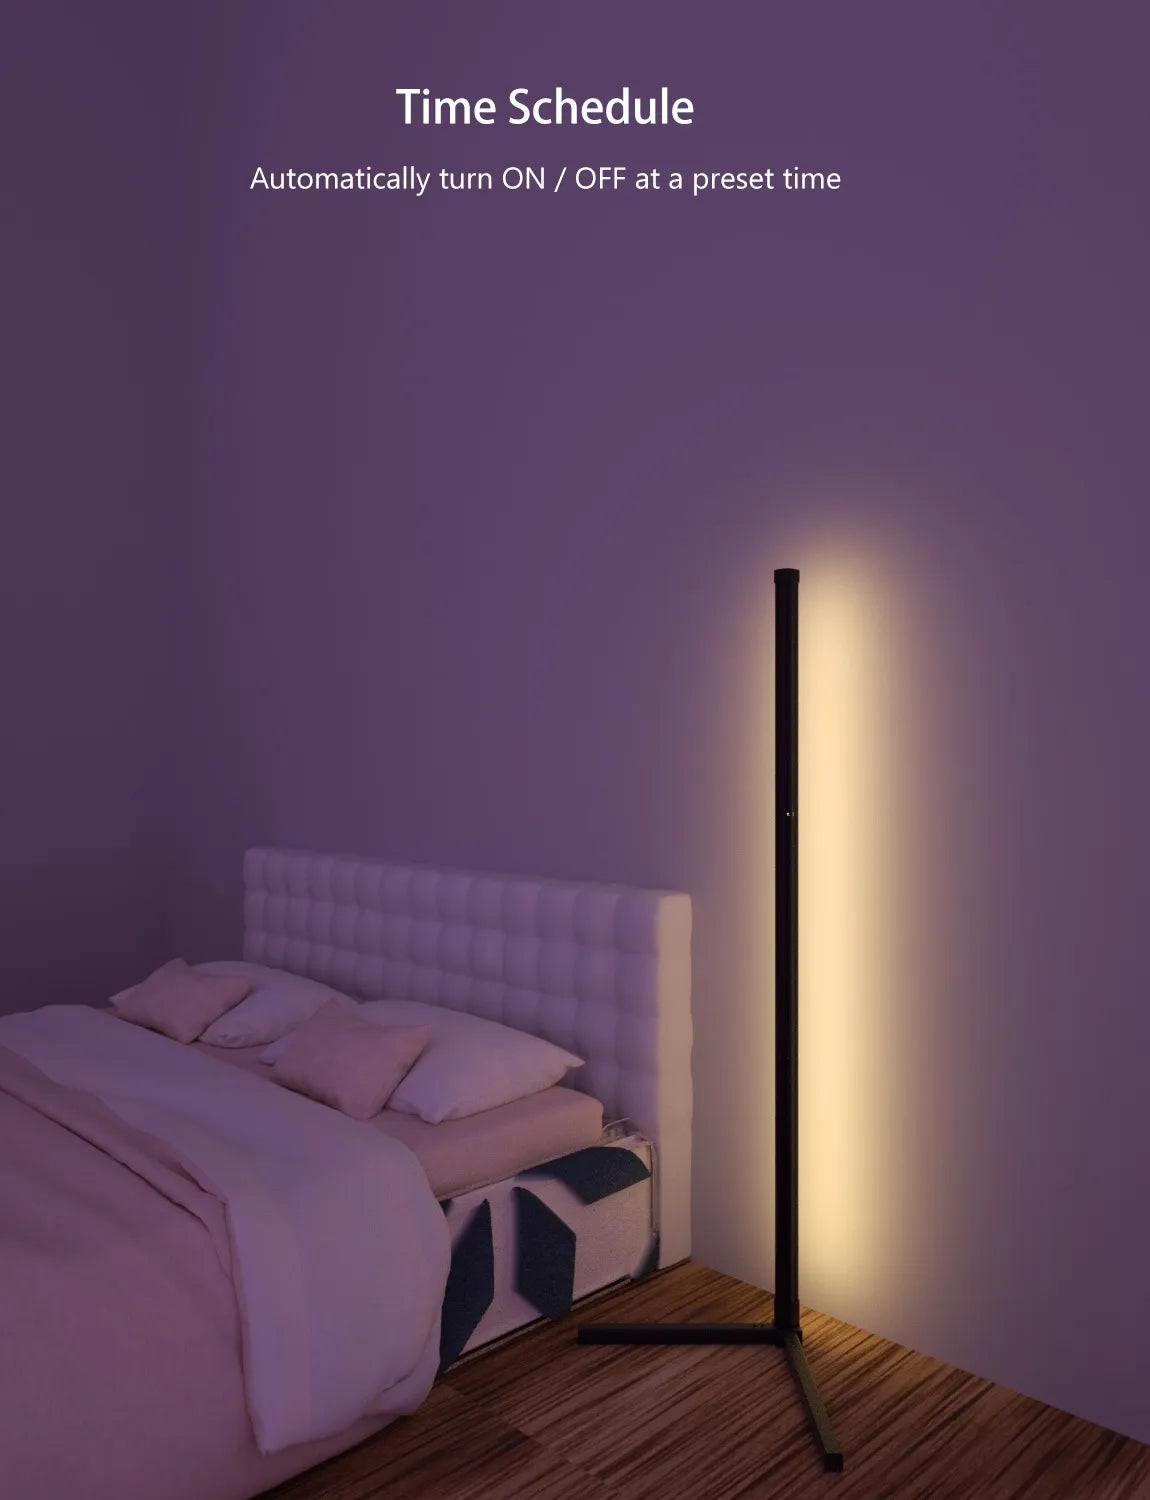 "Smart RGB Colour Floor Lamp casting vibrant hues, controlled via App & Remote for personalized mood lighting. Enhance your home decor with customizable, wireless, and modern lighting. Perfect for smart living and interior design enthusiasts